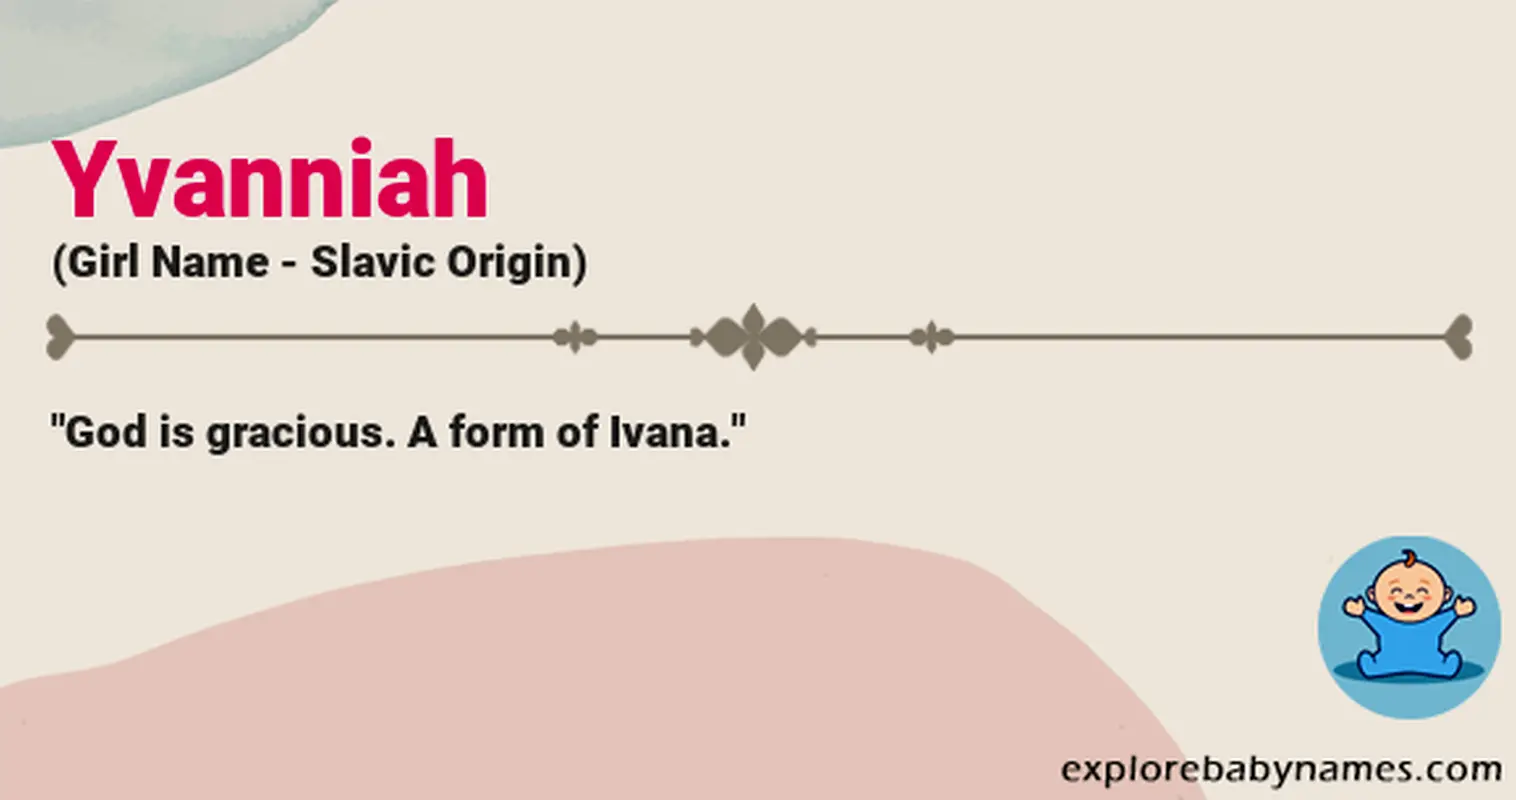 Meaning of Yvanniah